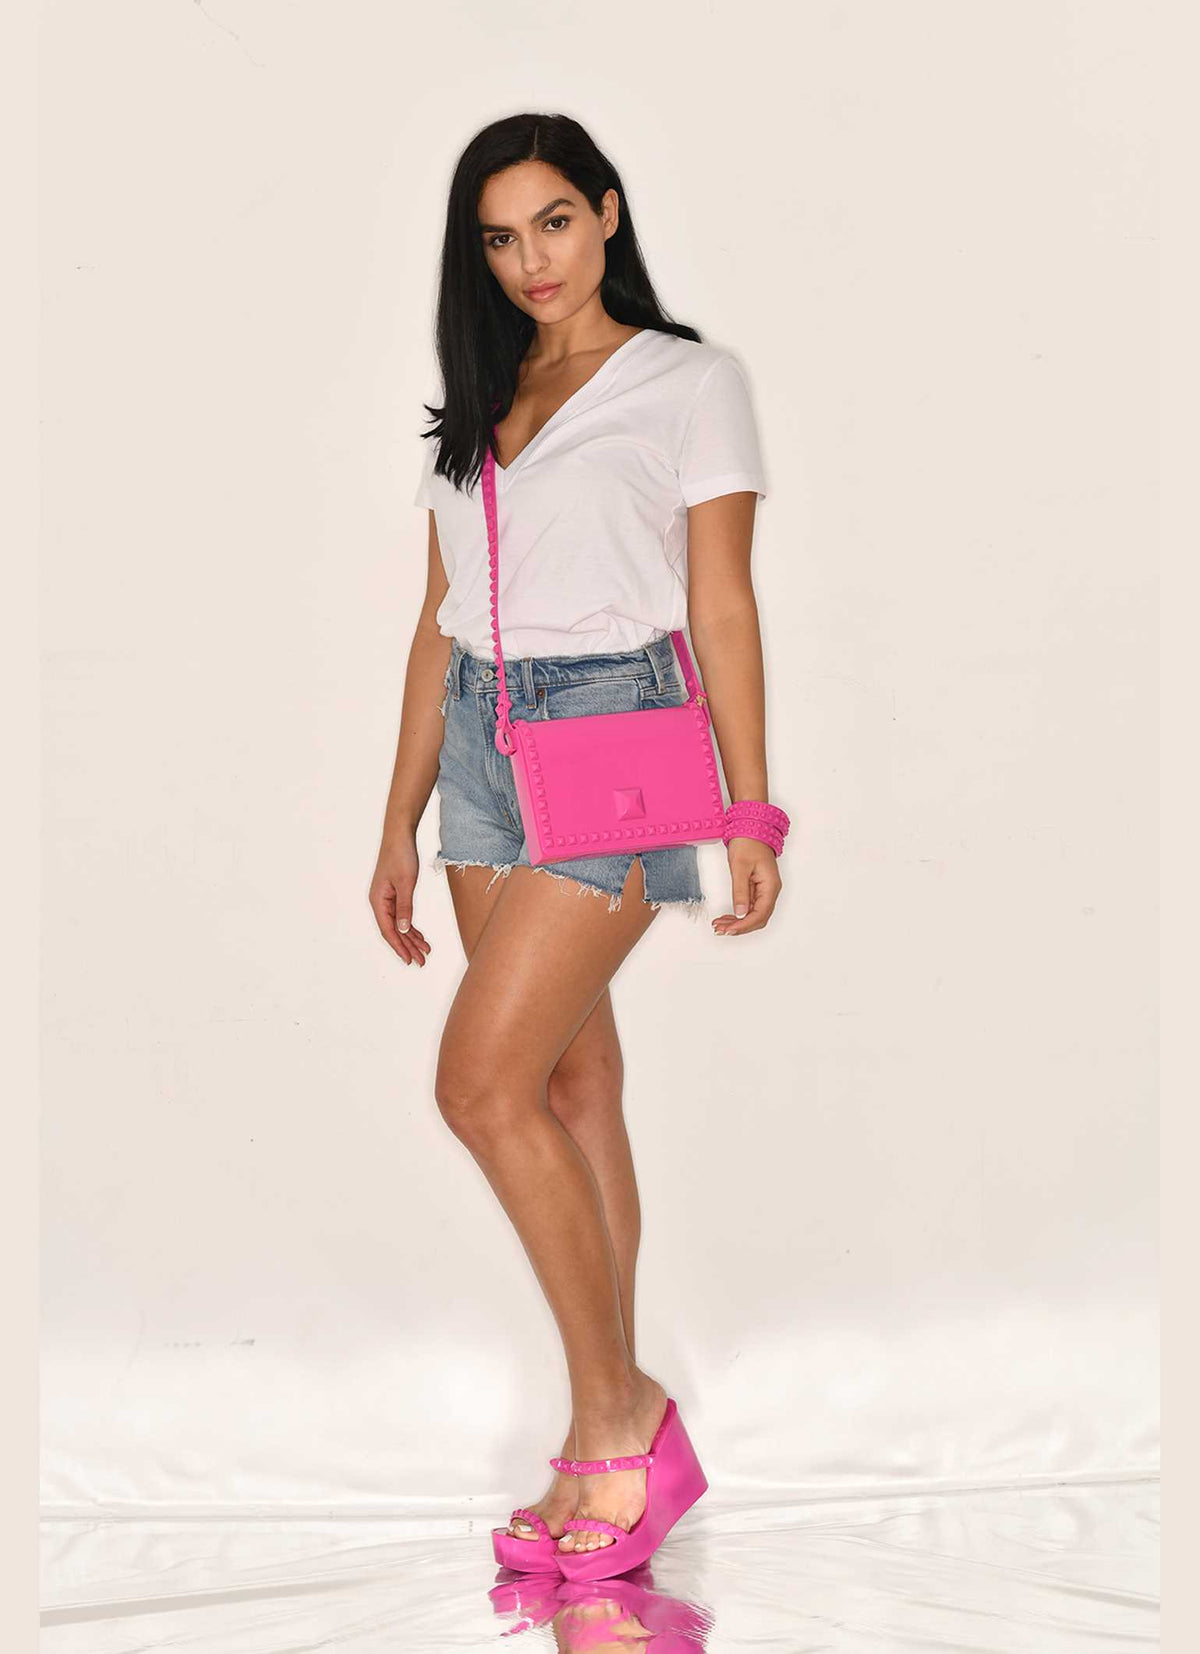 Flap jelly beach bags paired with Carmen Sol jelly bracelets and wedges